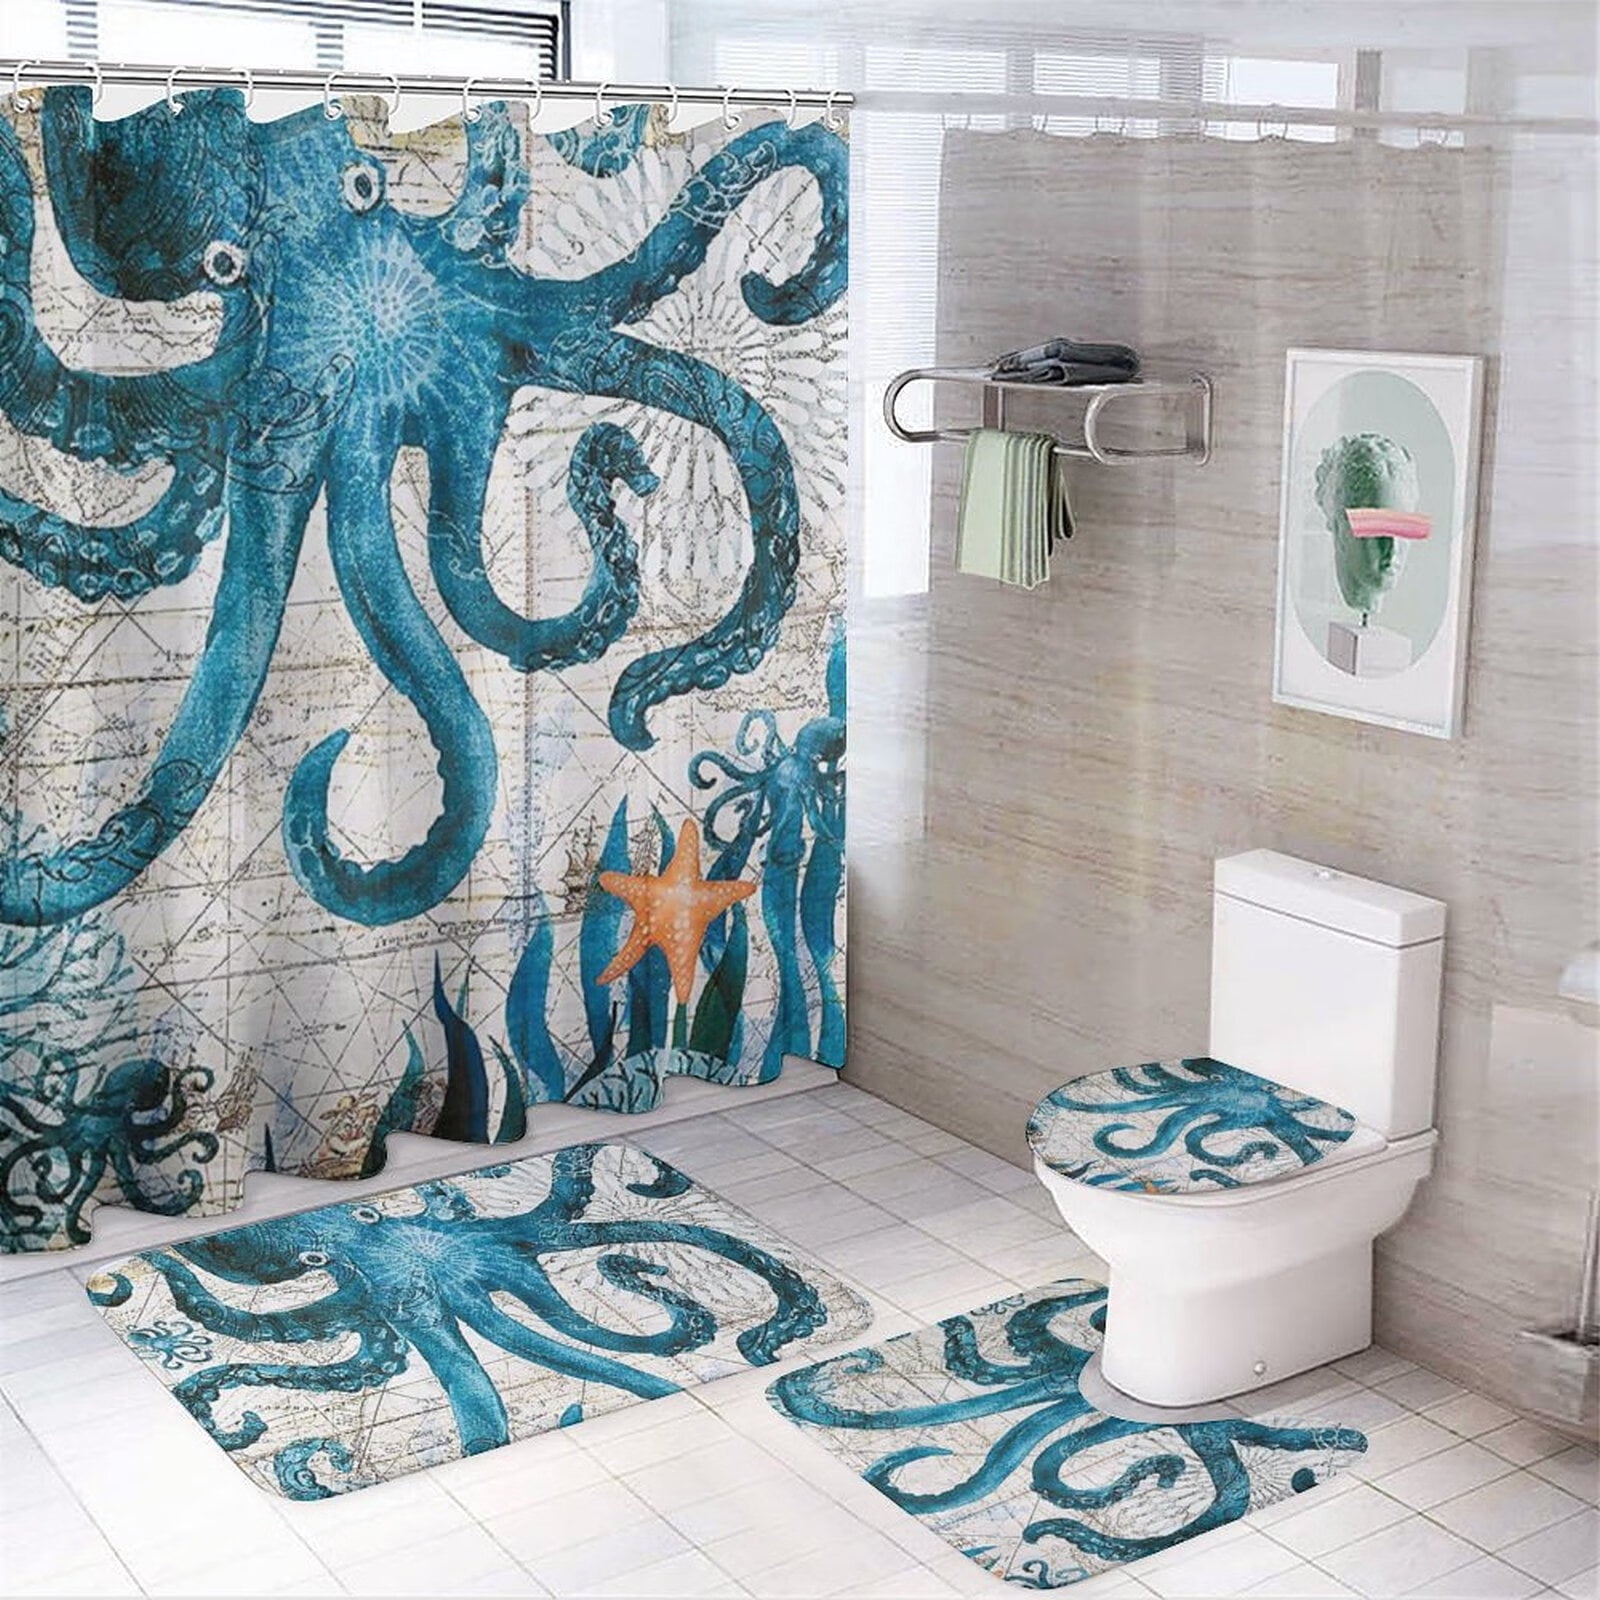 4PCS Blue Sea Bathroom Sets with Shower Curtain and Rugs and Accessories,  Ocean Octopus Shower Curtain Sets with 12 Hooks 